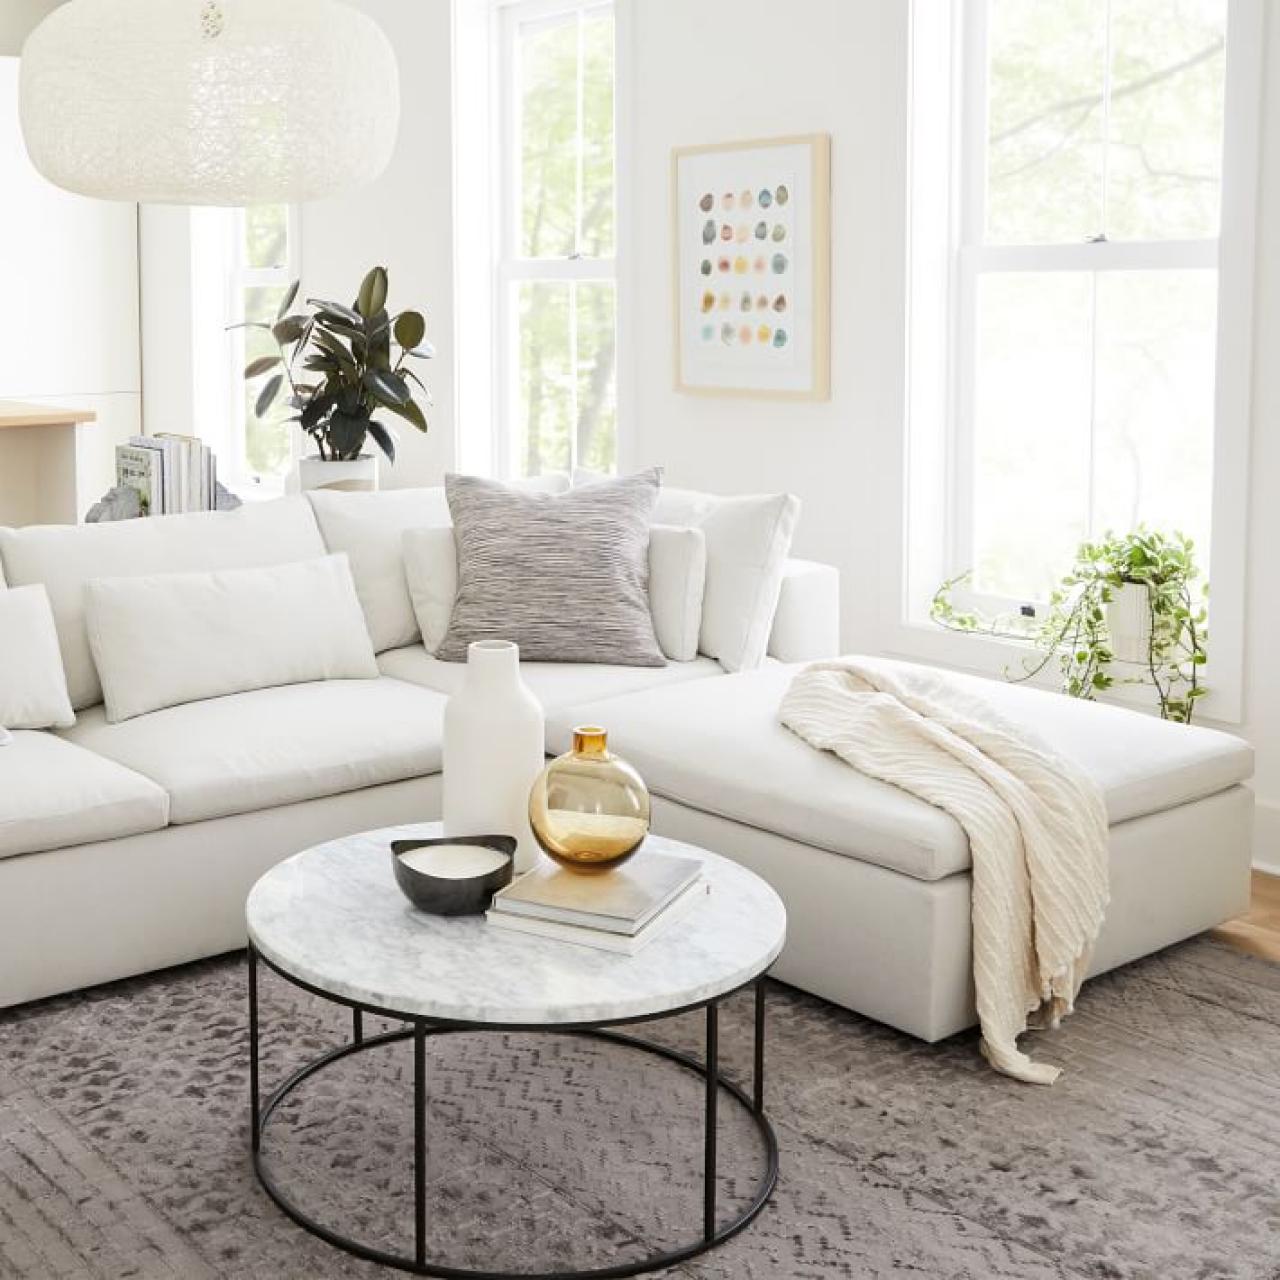 10 Editor-Tested West Elm Sofas and Dining Room Tables You Can Save Big On